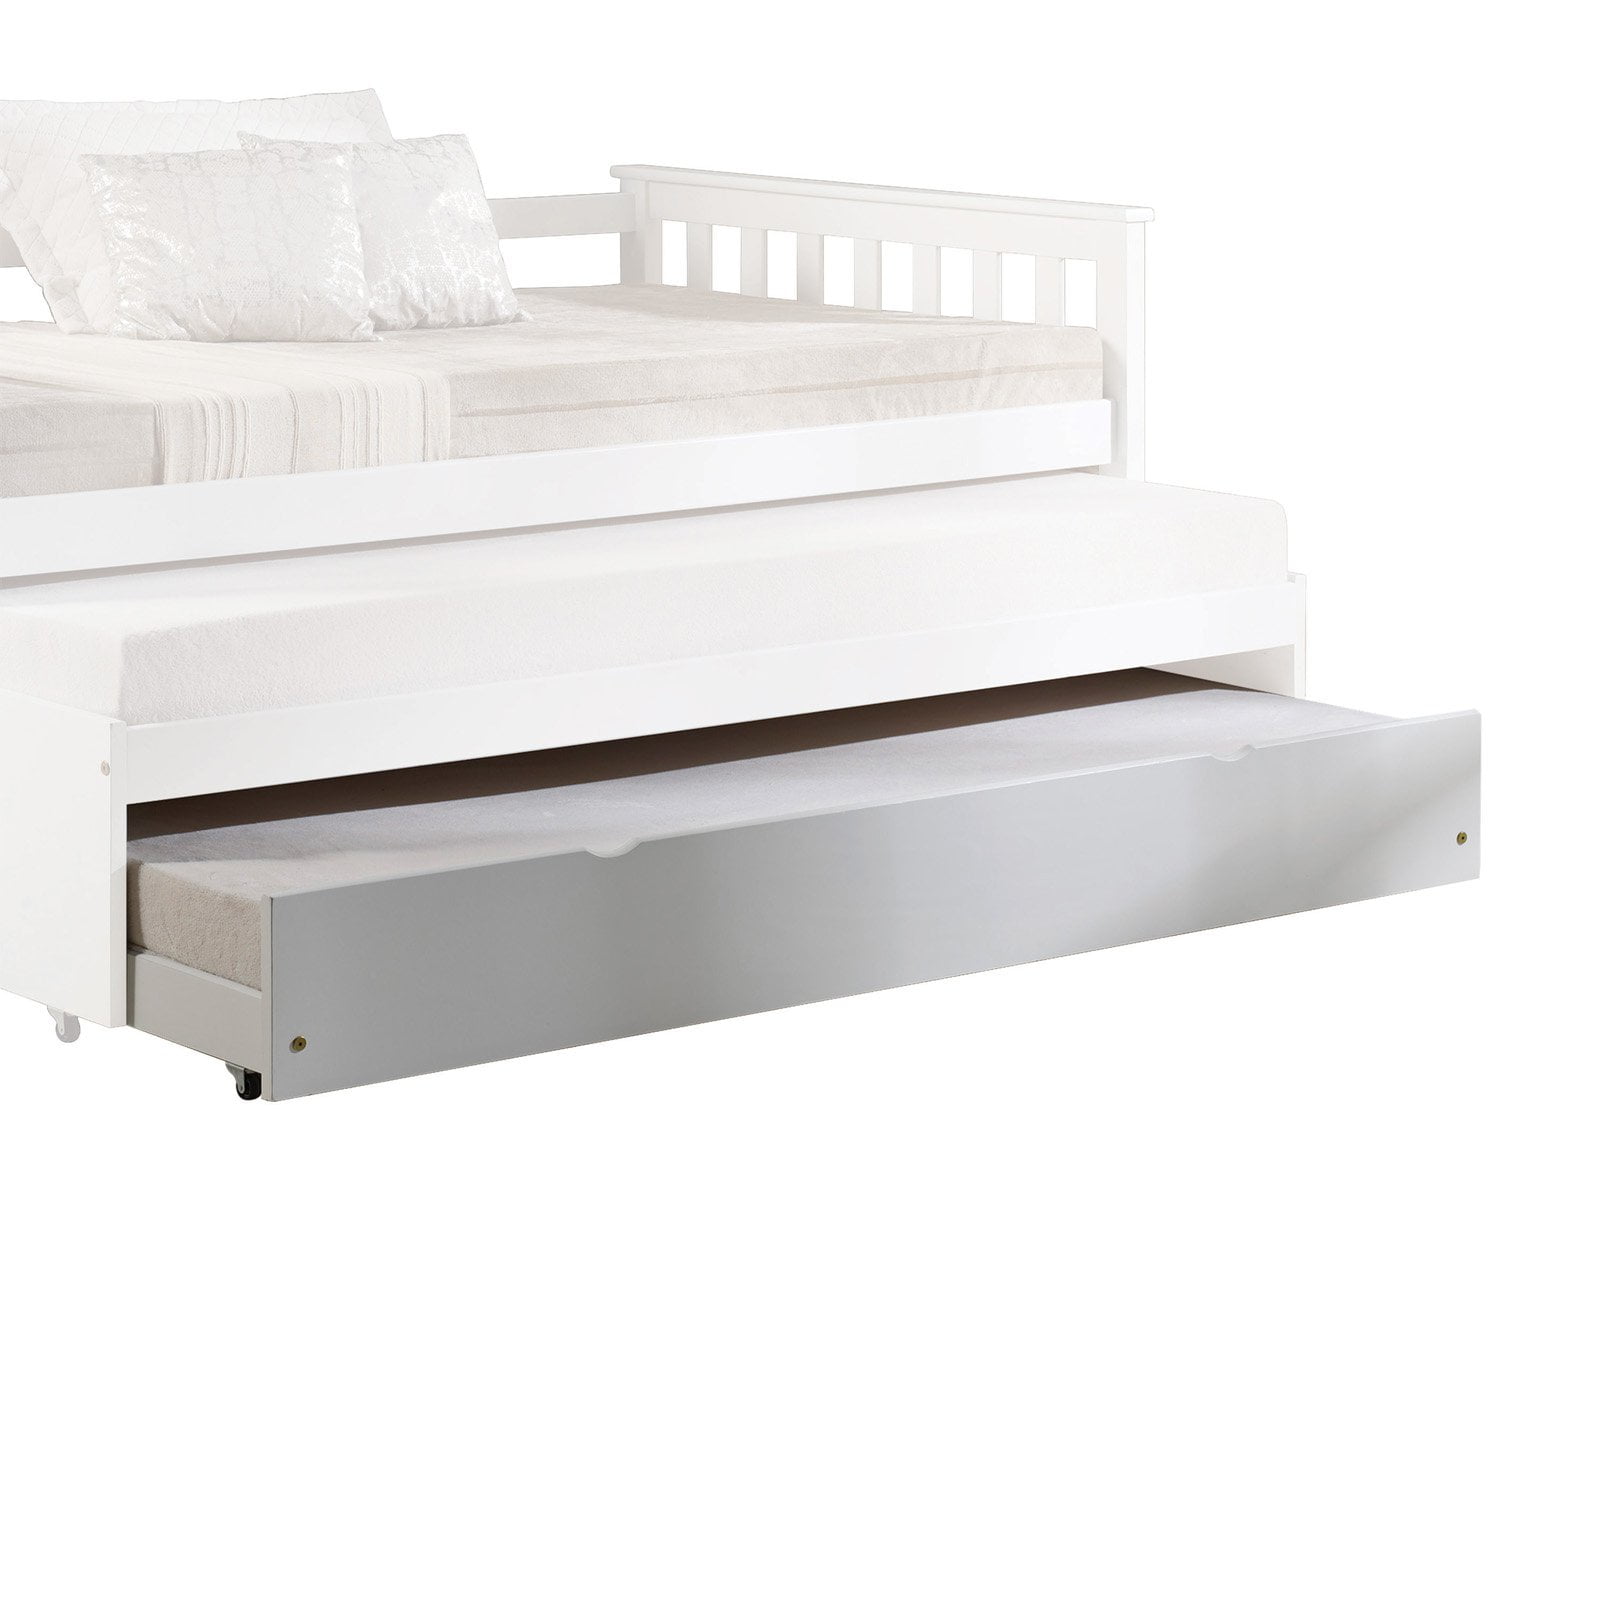 Picture of ACME 39083 Cominia Trundle - White - 10 x 77 x 41 in.